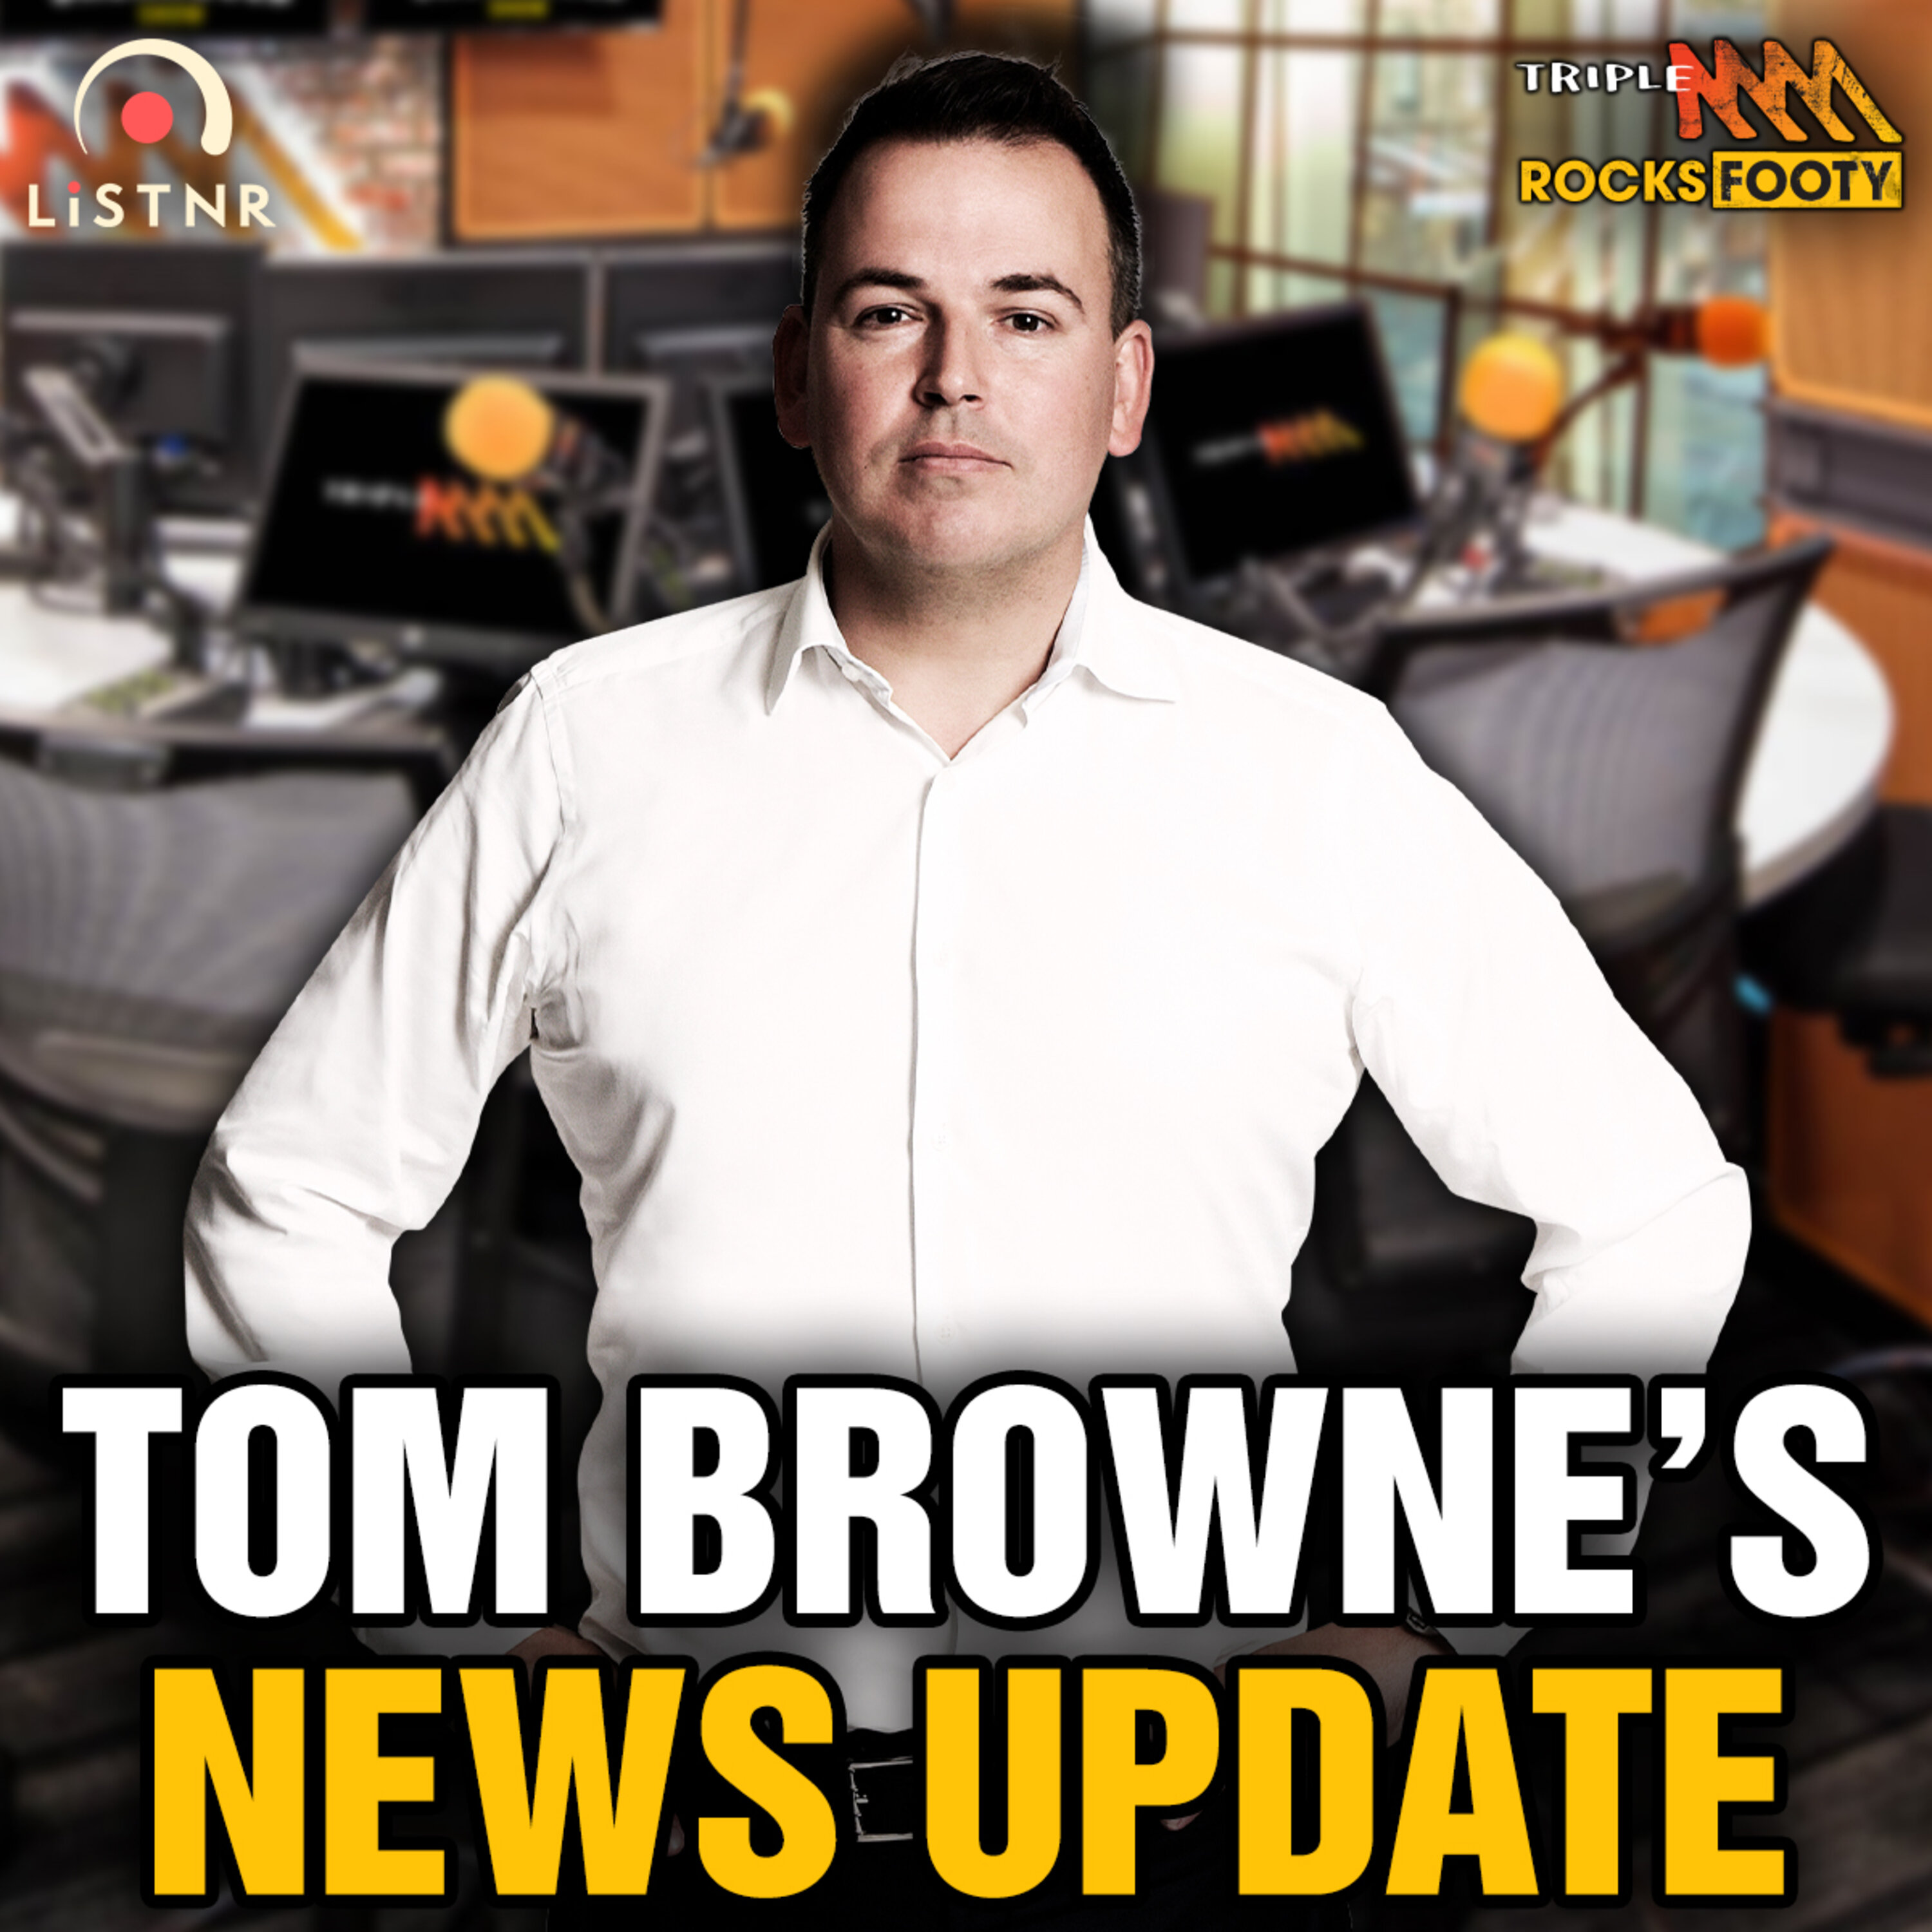 Tom Browne's News | Brad Scott’s first order of business as Essendon coach, Jordan de Goey staying a Pie, who replaces Scott at the AFL